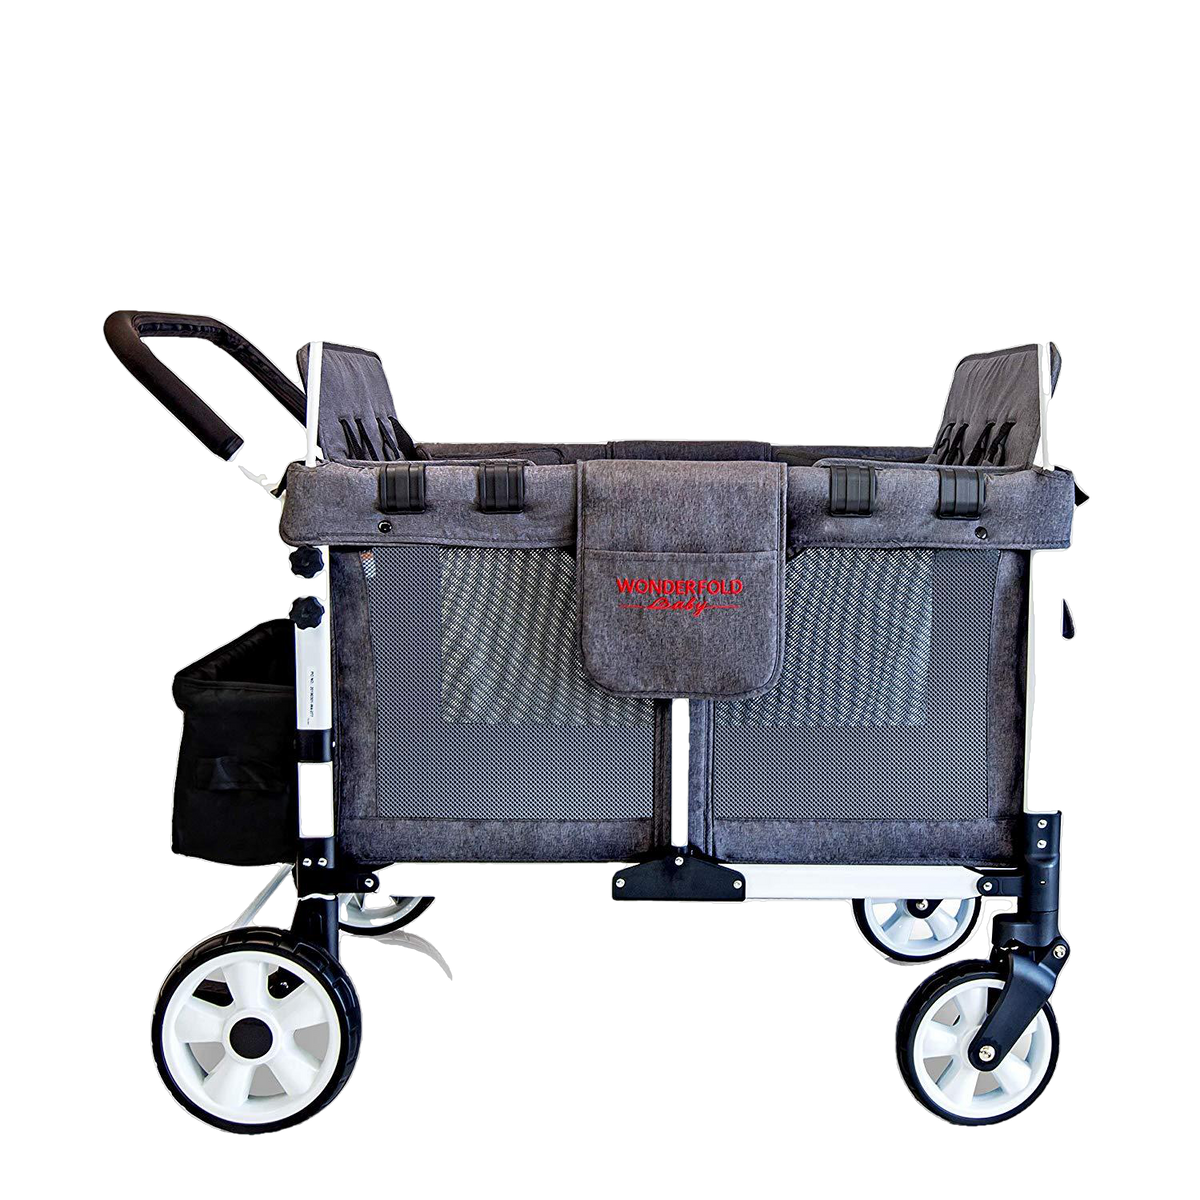 WonderFold Baby Multi-Function Folding Quad Stroller Wagon with Removable Canopy and Seats Gray New